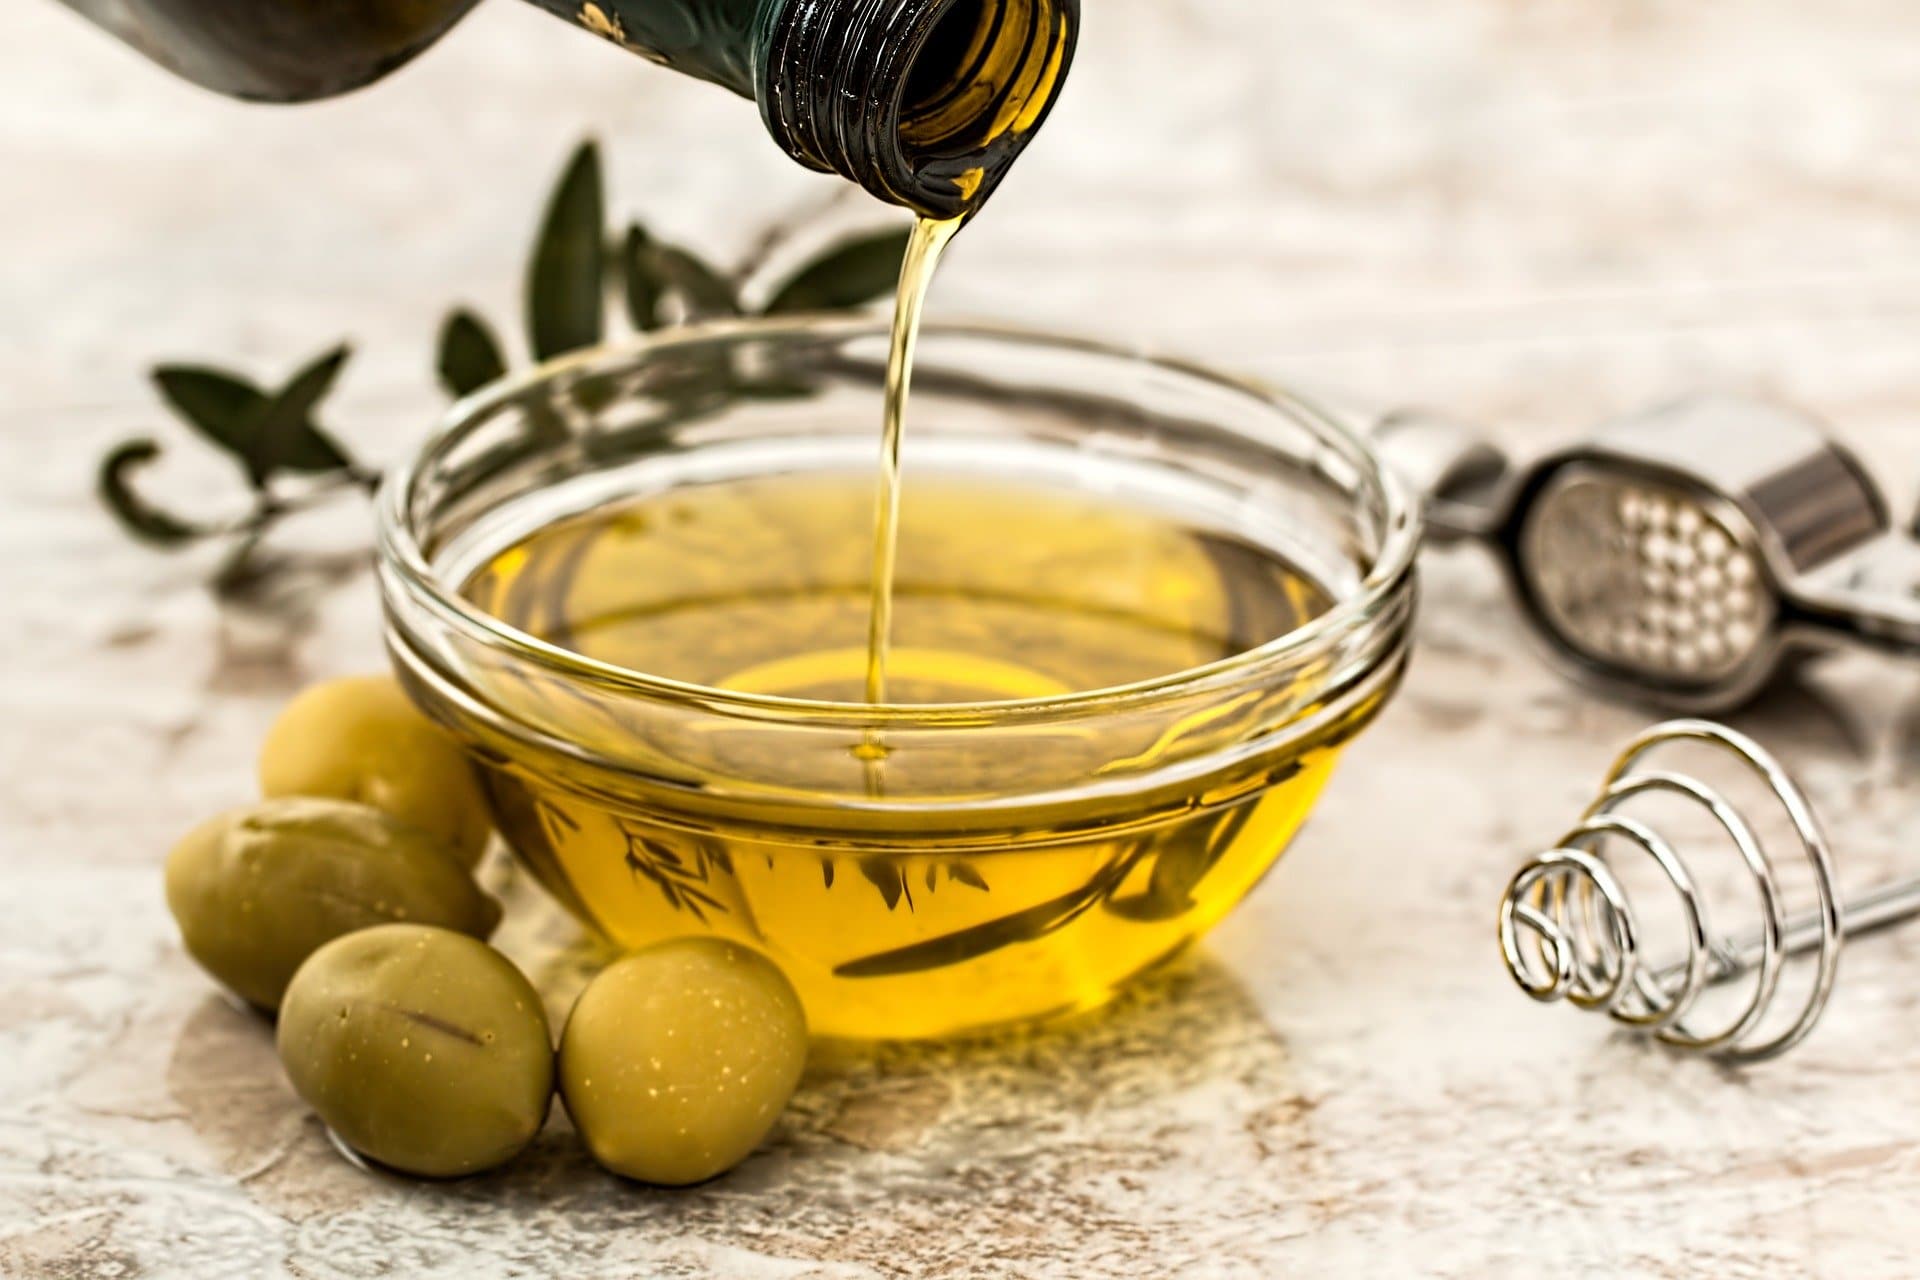 Drizzling olive oil into a bowl.